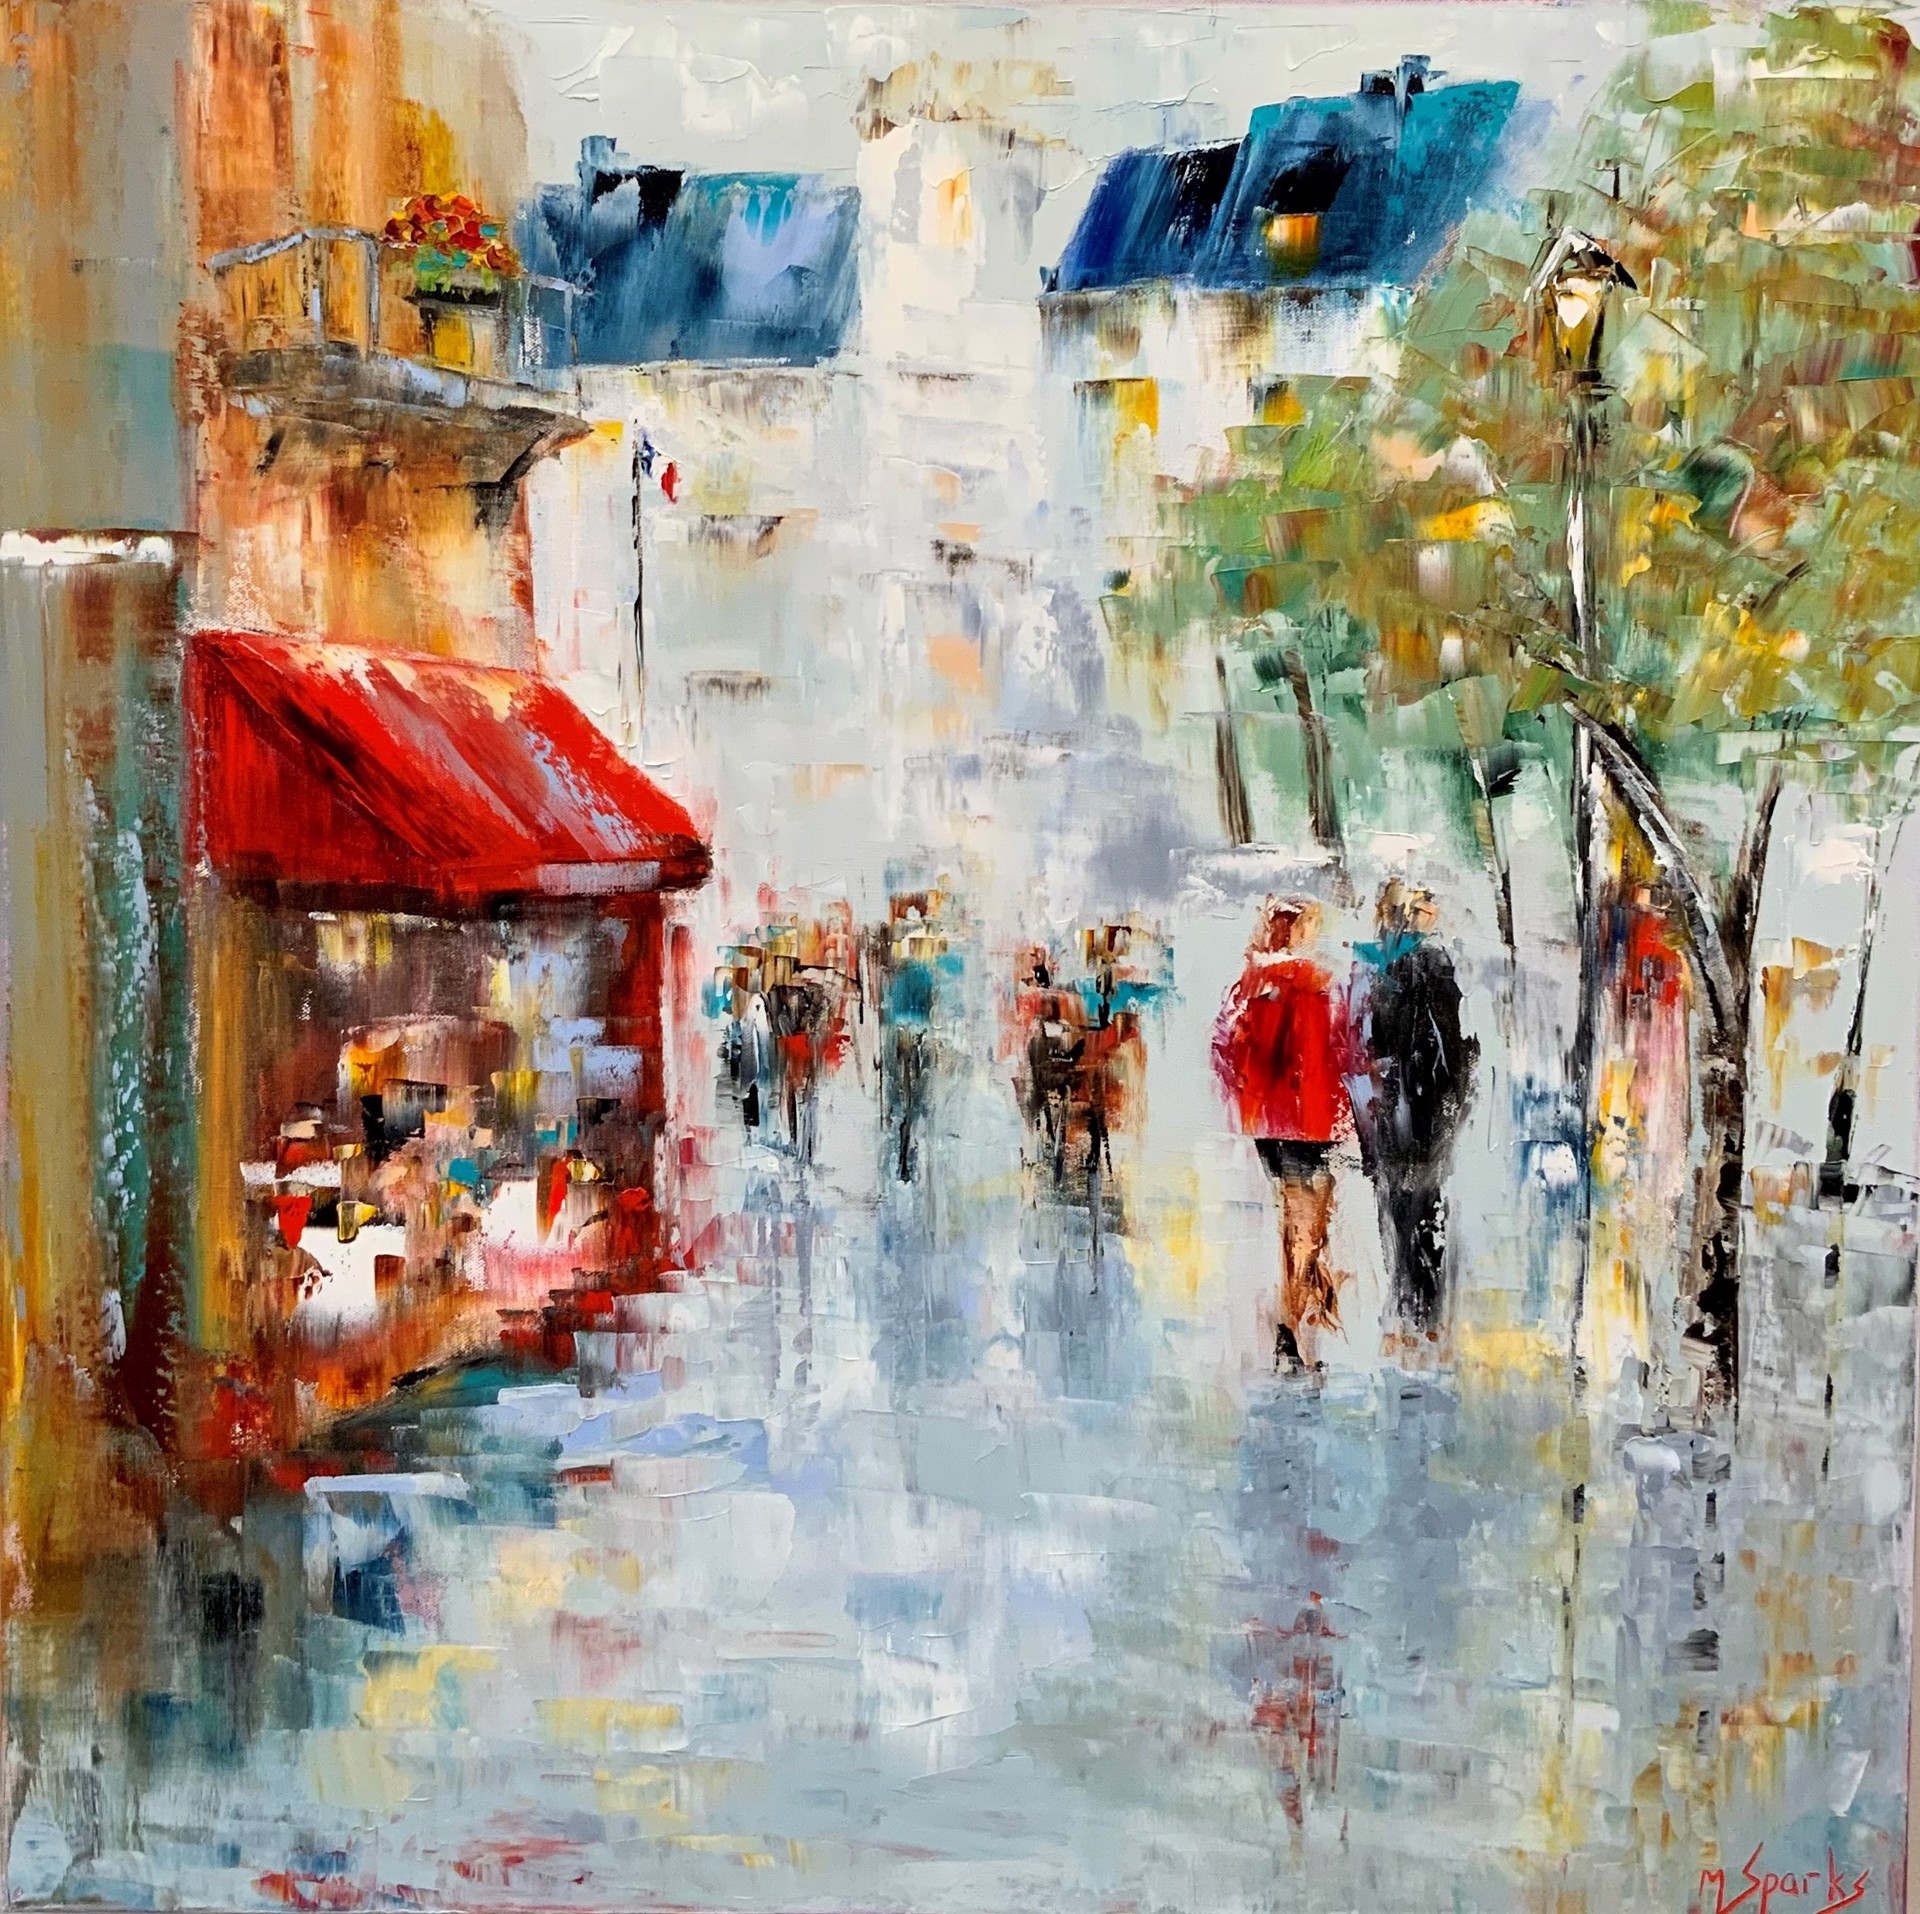 City Centre Stroll by Marilyn Sparks